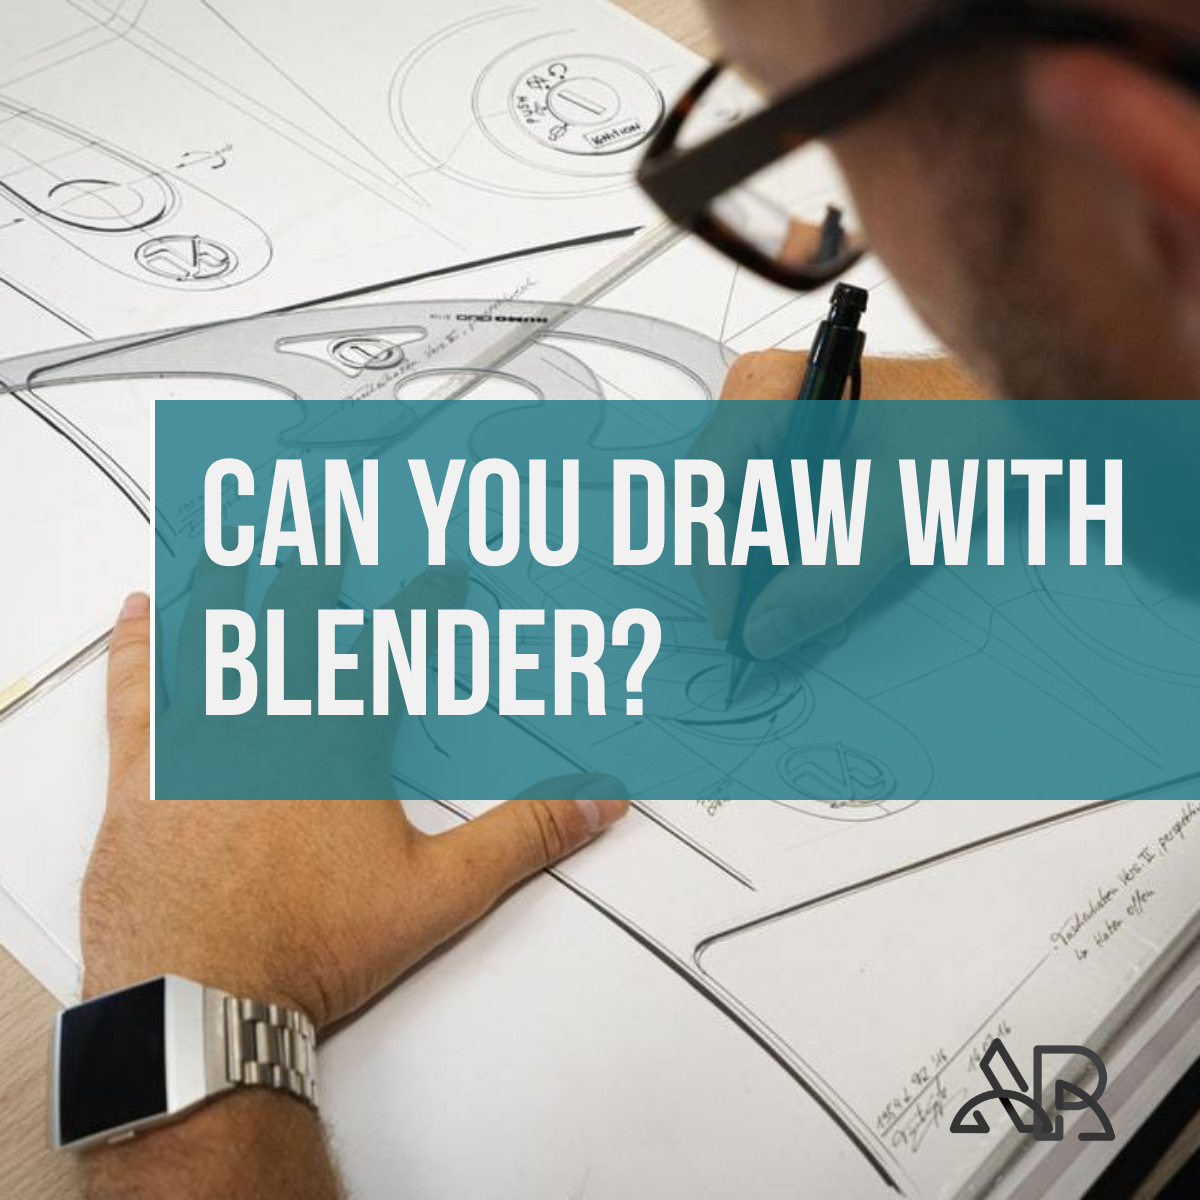 you draw with Blender?